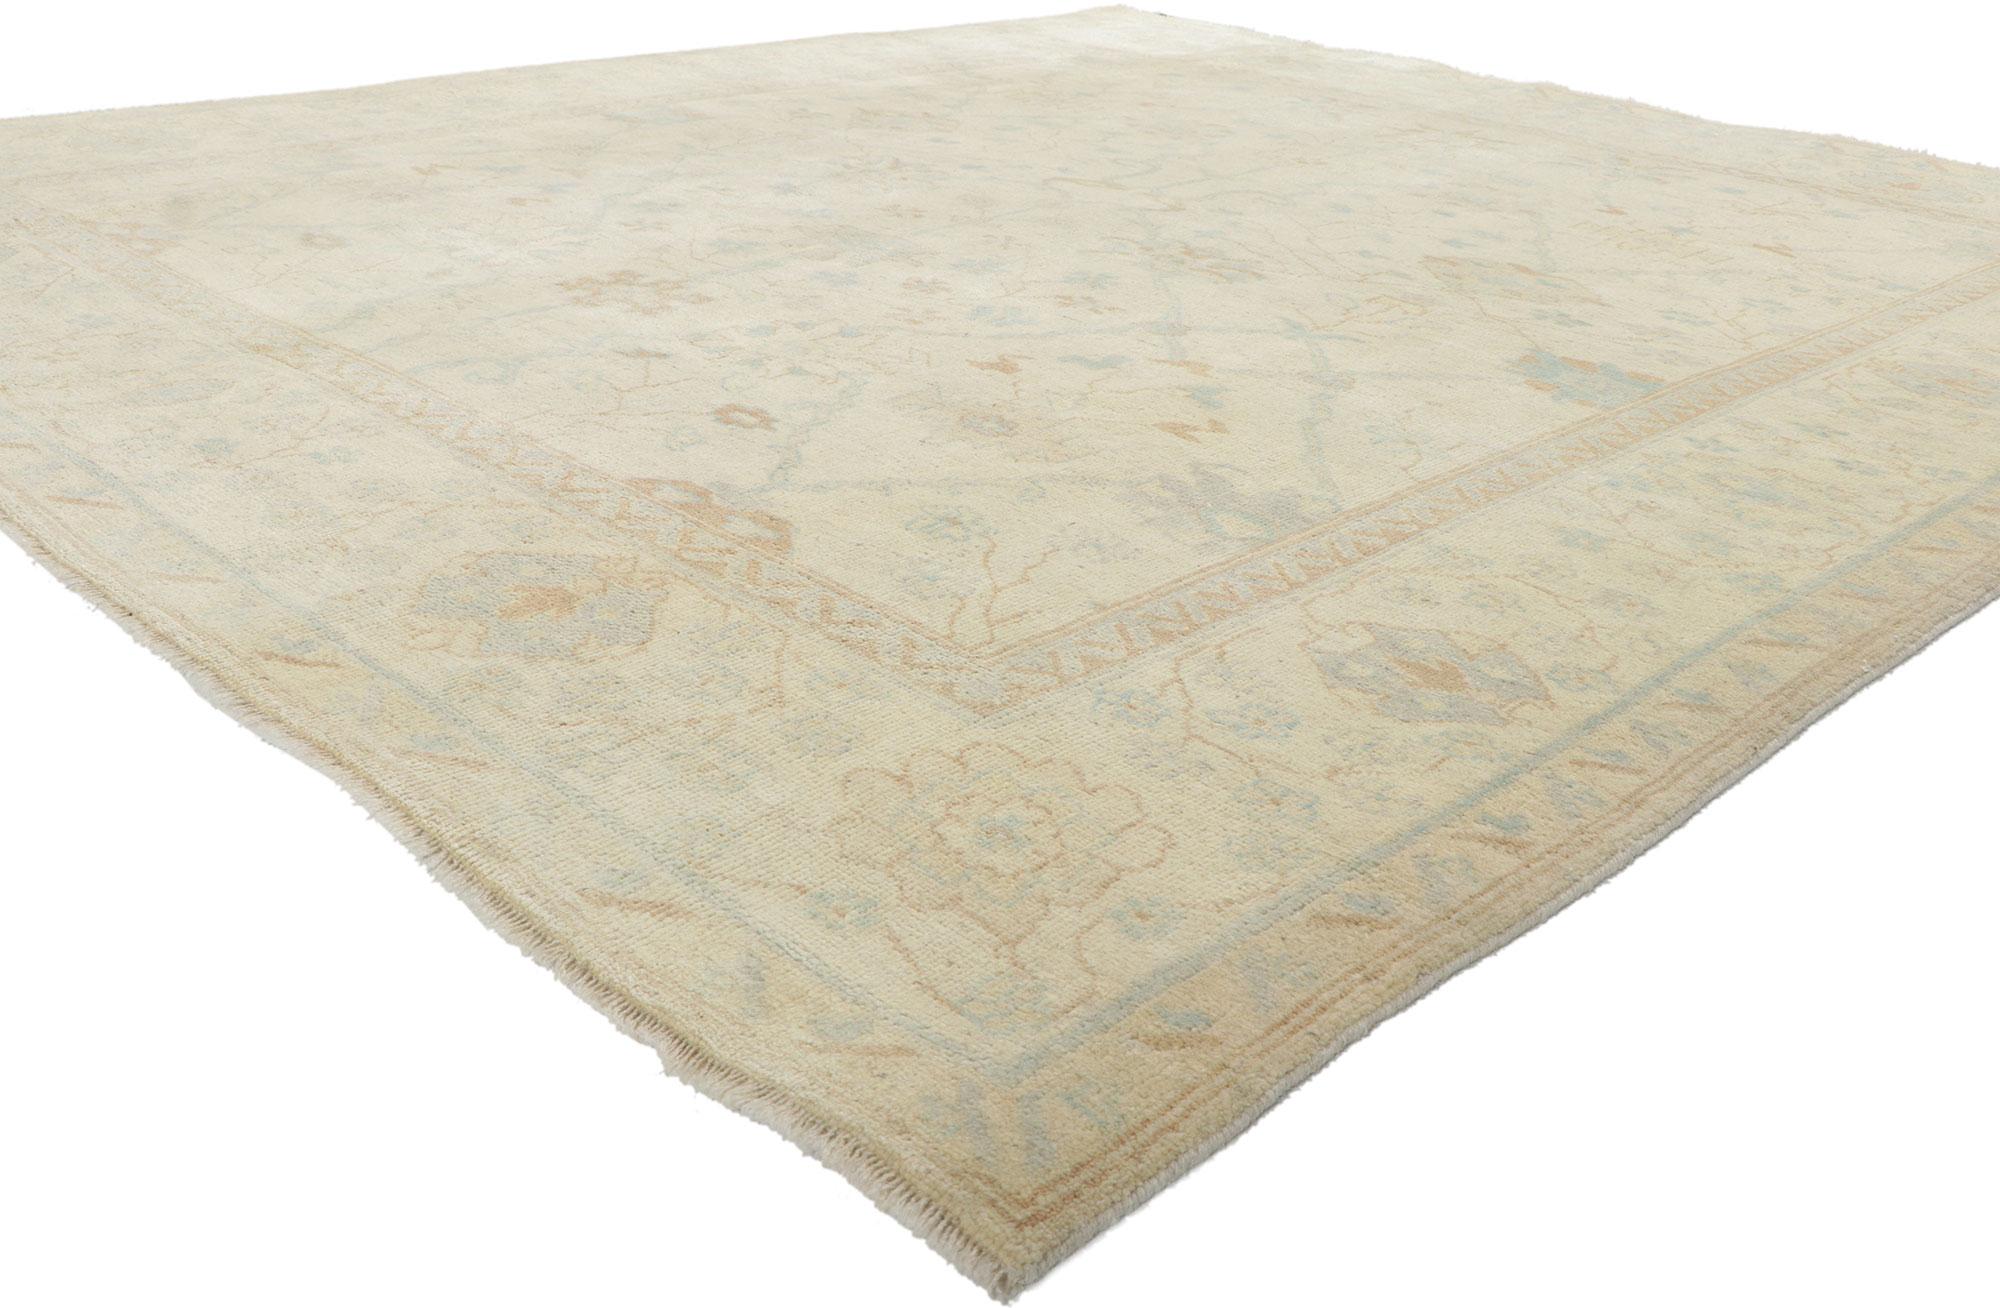 30199 New Transitional Oushak Rug with Soft Earth-Tone Colors, 08'00 X 09'02. Blending Coastal Cottage style and elements from the modern world, this hand knotted wool contemporary Oushak rug beautifully balances vintage charm and modern style. It